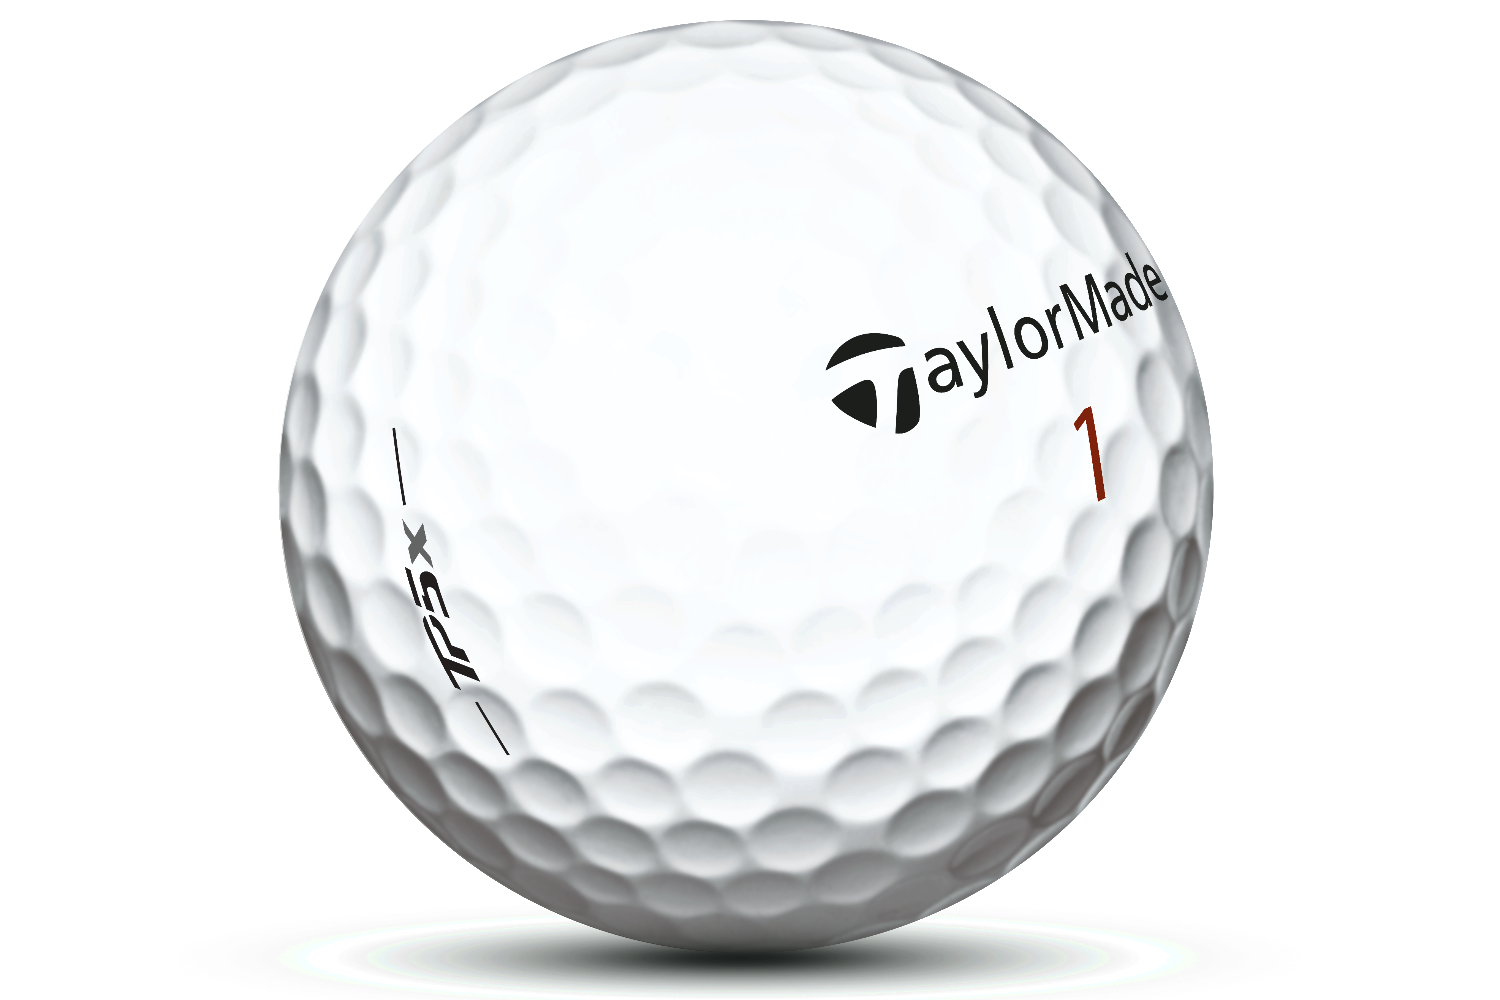 TaylorMade launch new five piece TP5 and TP5x balls